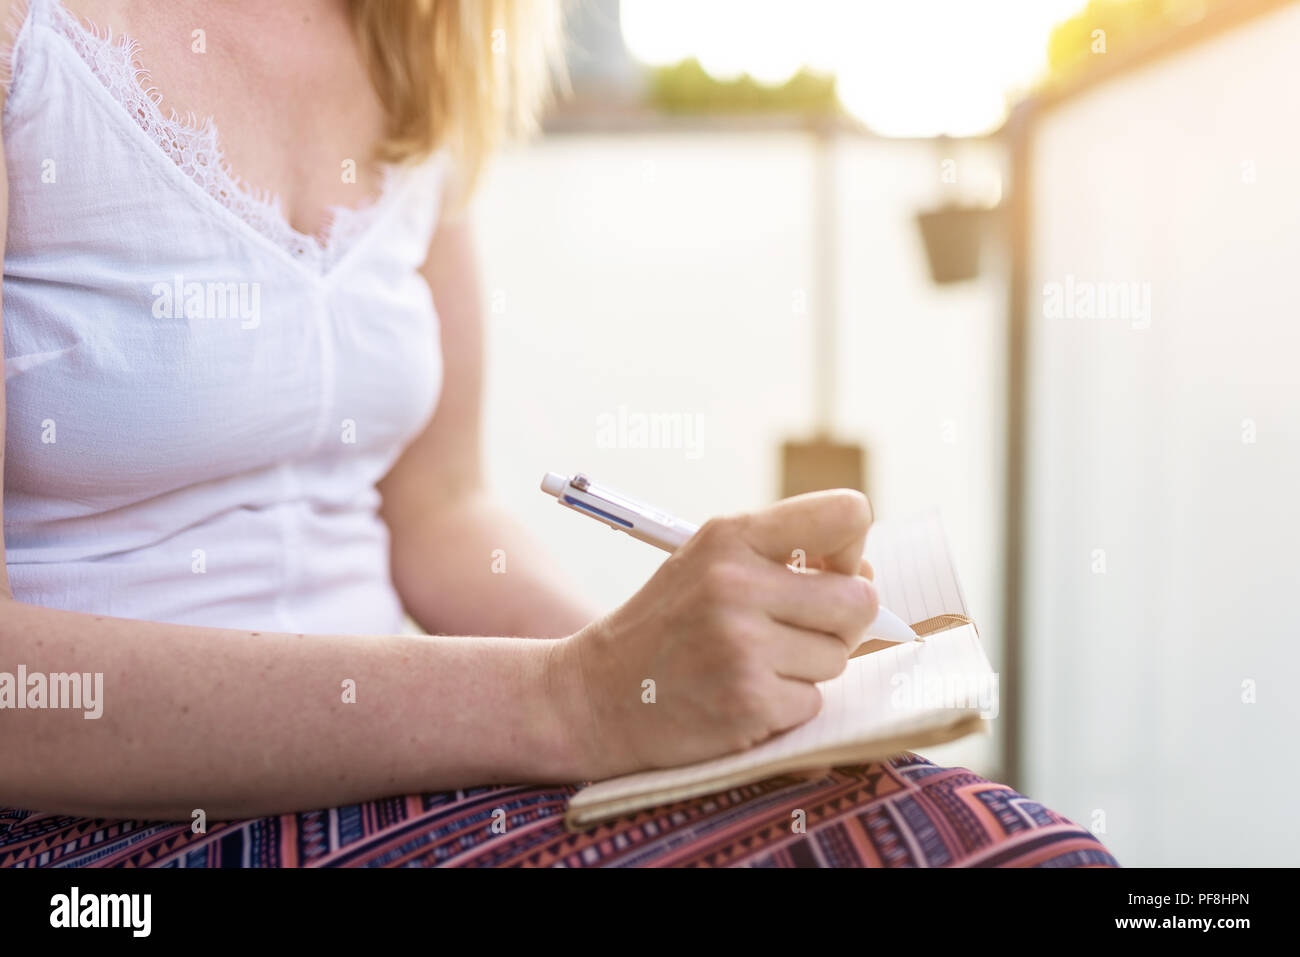 woman sitting on patio taking notes in notebook Stock Photo